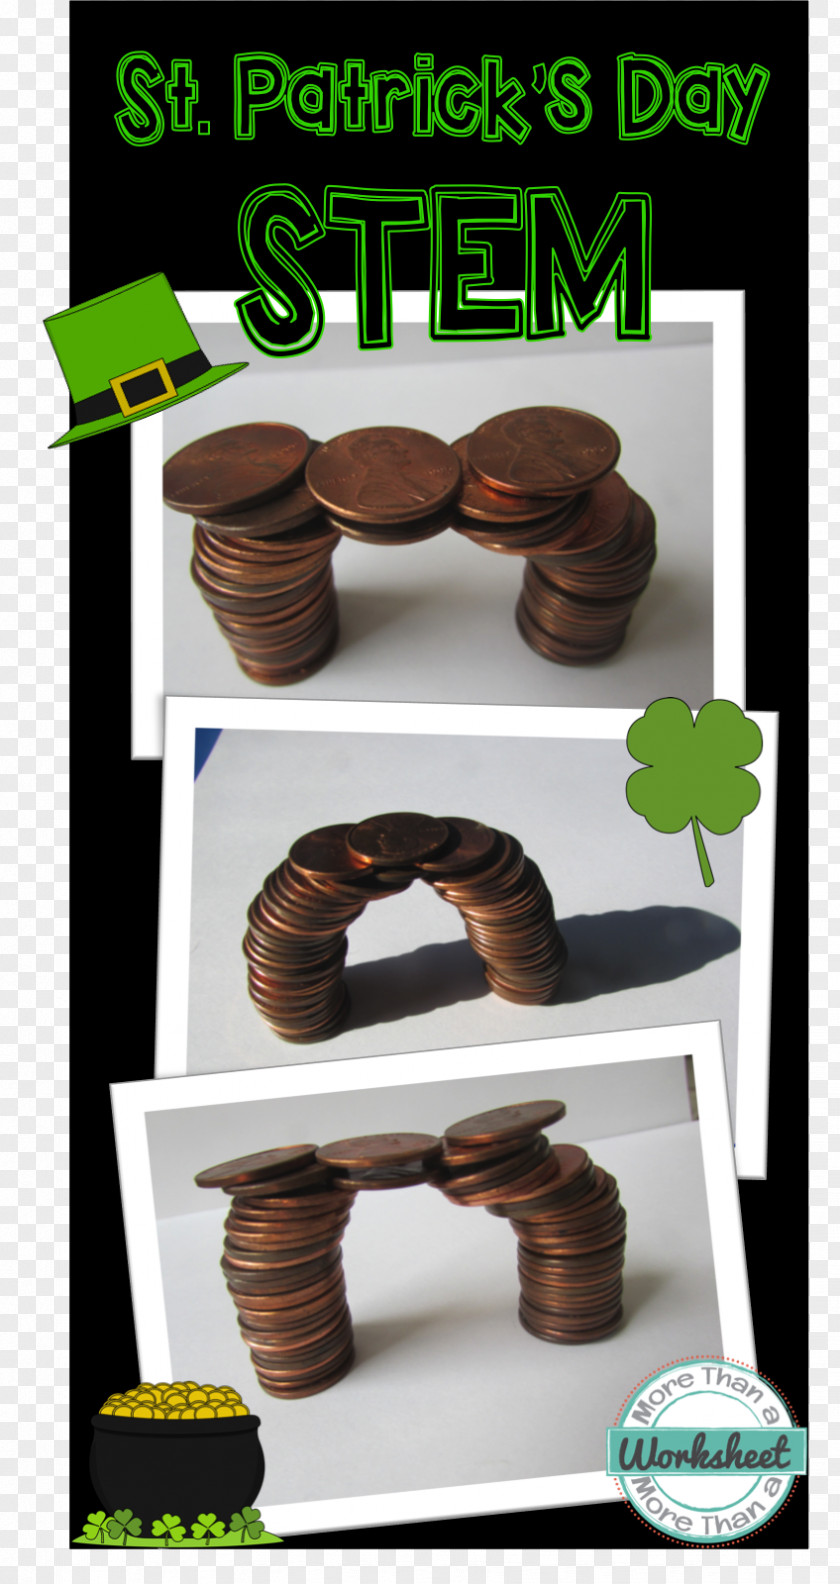 Saint Patrick's Day Science, Technology, Engineering, And Mathematics Leprechaun Traps PNG